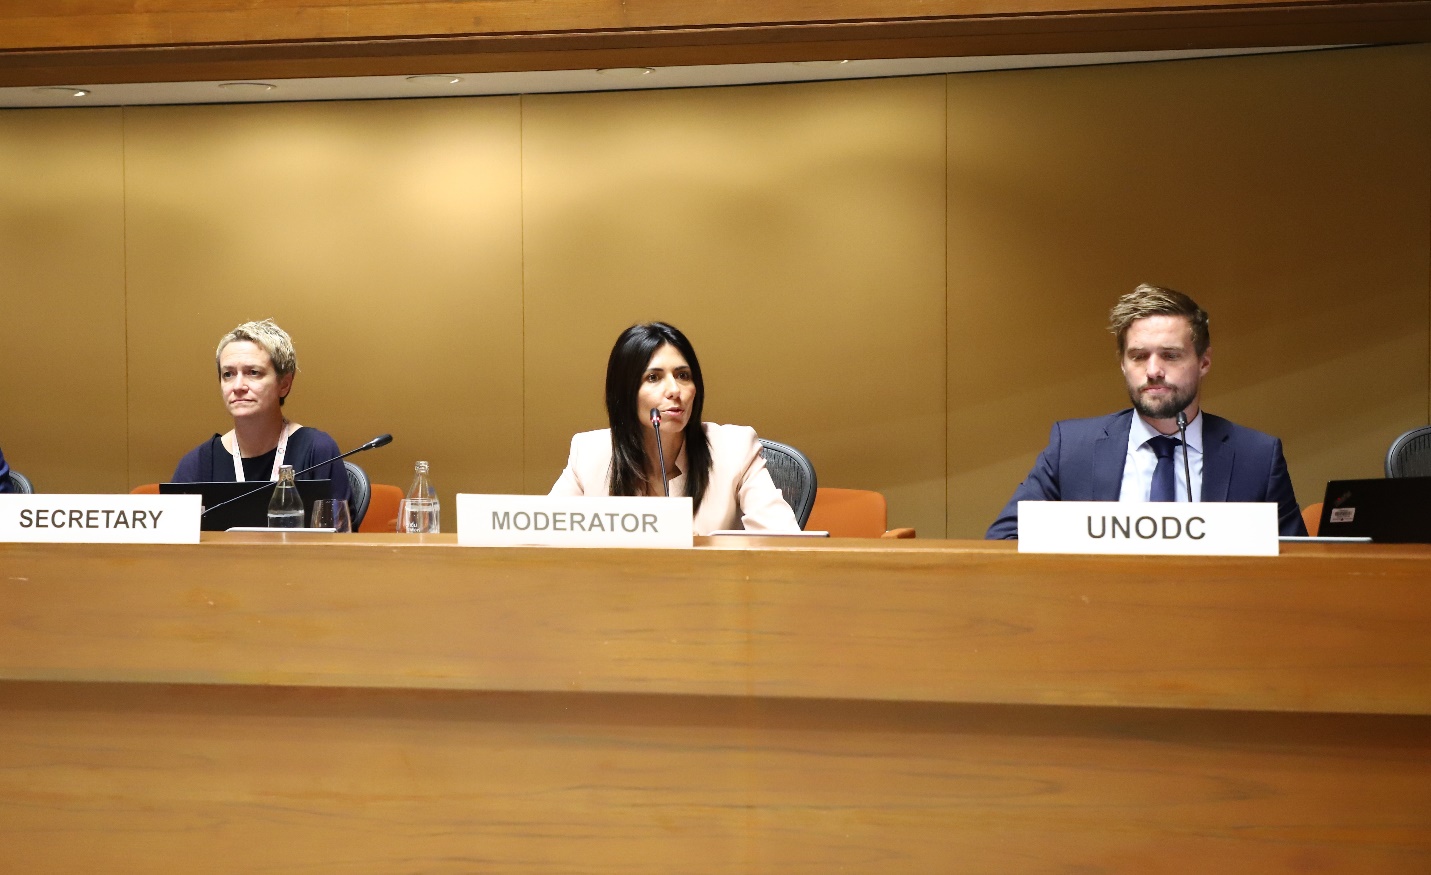 Valentina Pancieri and Tom Dixon of UNODC speak about drug trafficking and concealment methods and cross border operations in the Asia Pacific region